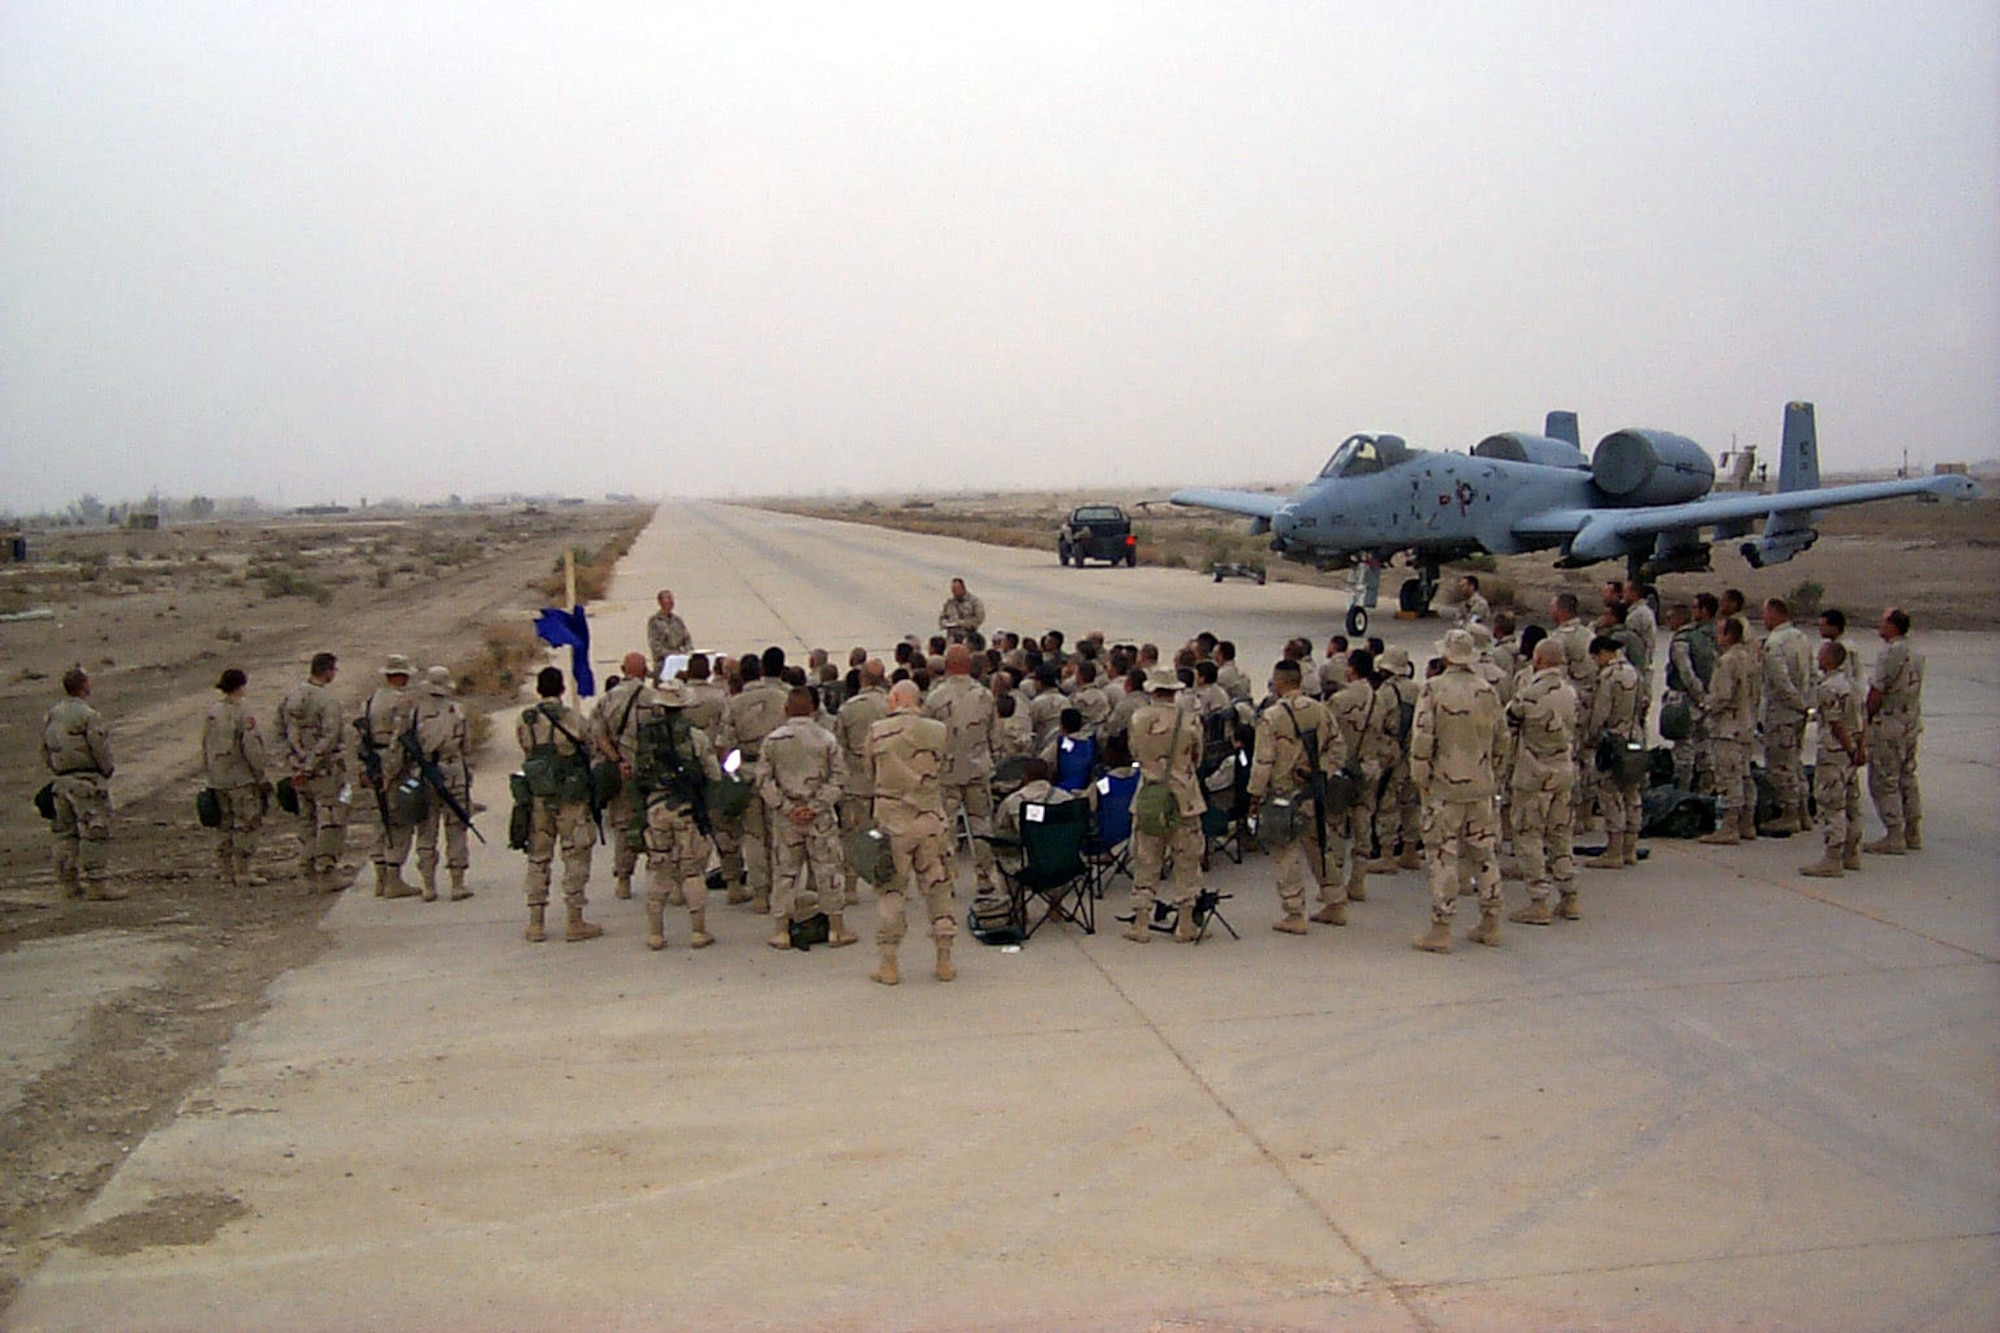 OPERATION IRAQI FREEDOM -- About 75 airmen and soldiers gather at Tallil Air Base, Iraq, for an Easter sunrise service on the flightline April 20.  Deployed chaplains offer spiritual and religious services and help increase the morale of warfighters.  (U.S. Air Force photo by Tech. Sgt. Charlie Lespier)